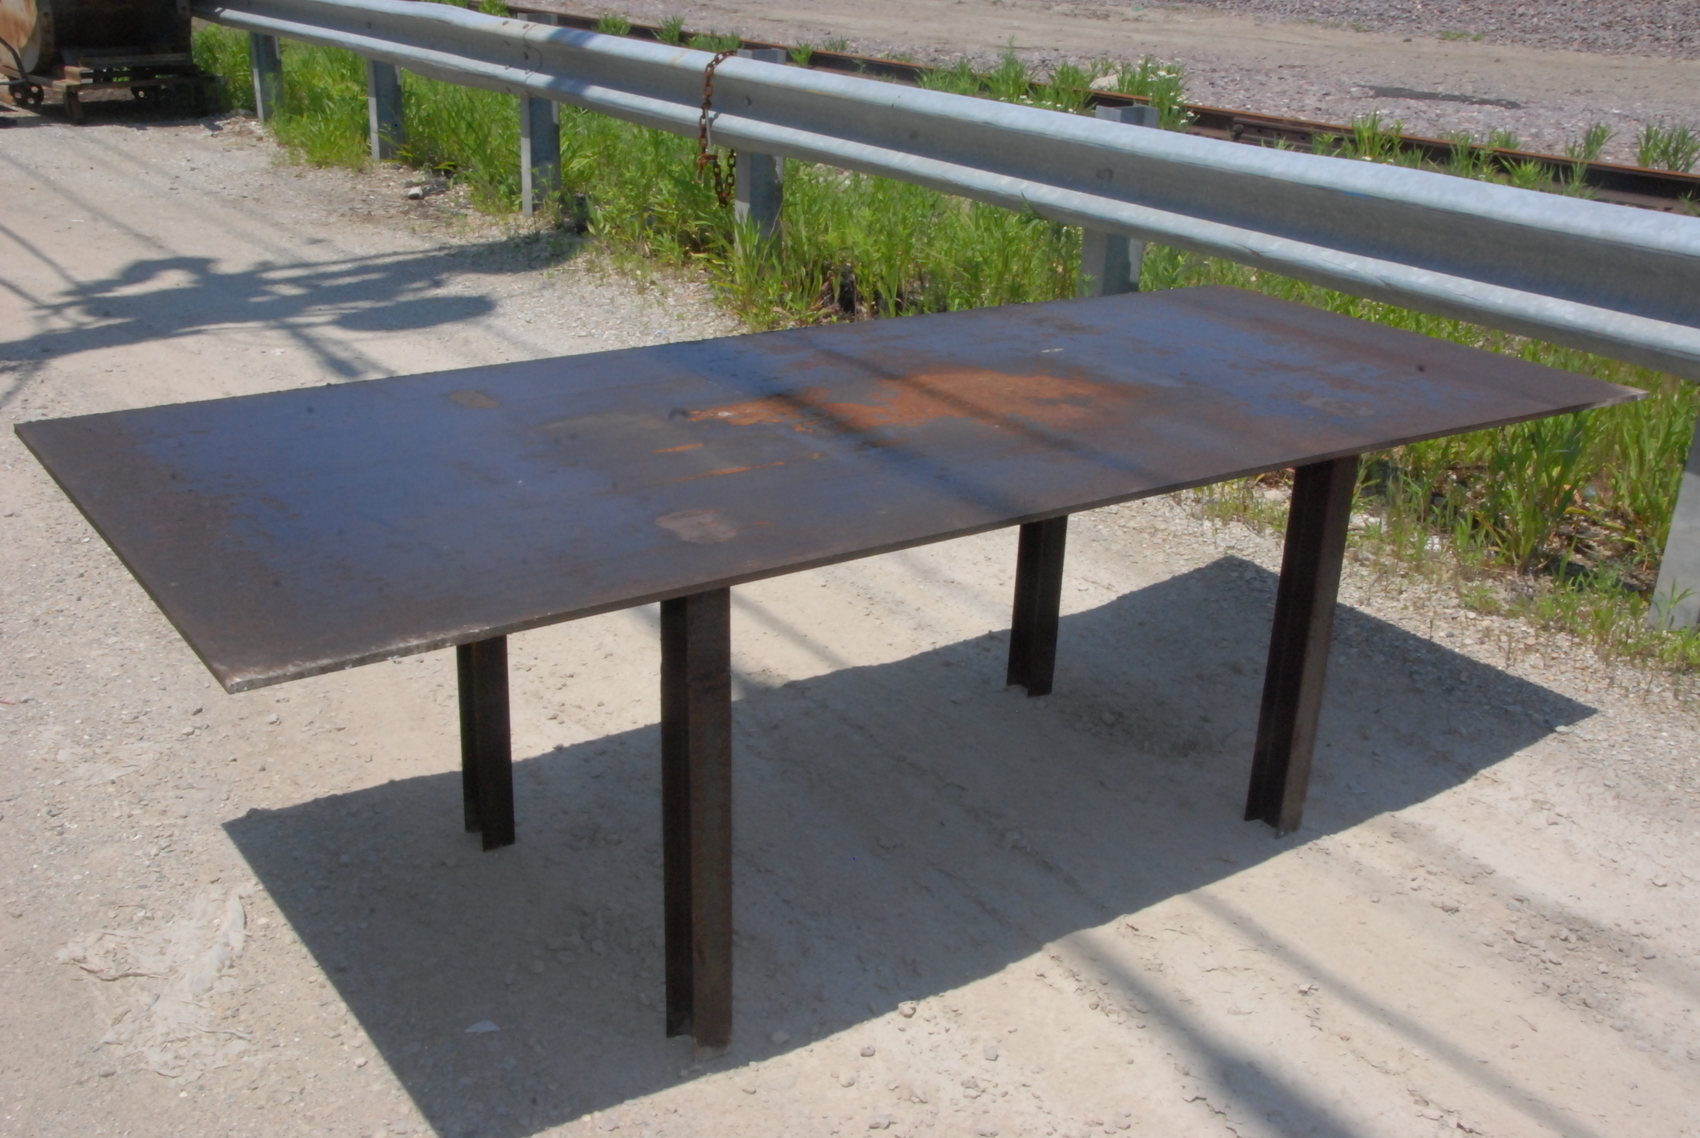 Welding table 96 1/2*40*30,3/8"thick nopl